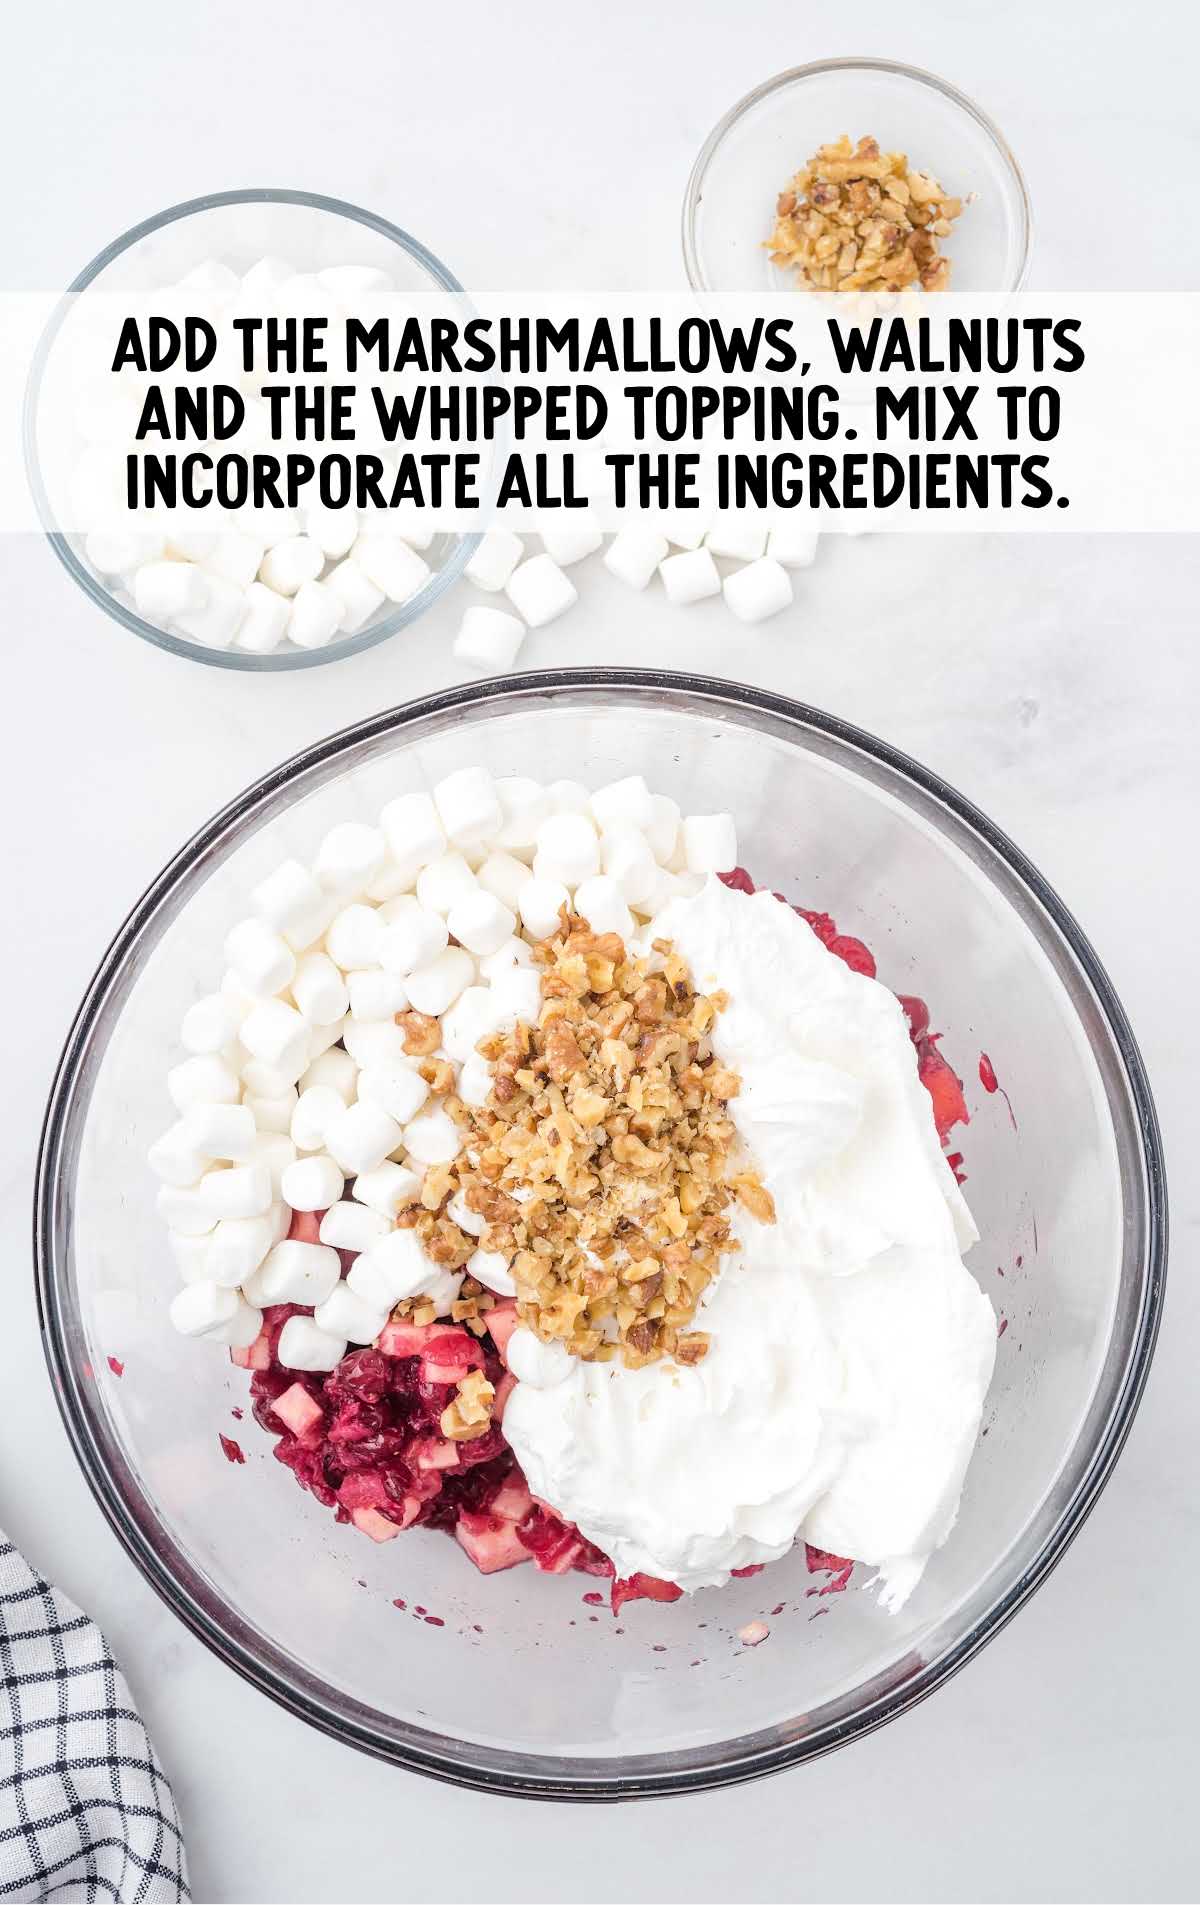 marshmallows, walnuts, and whipped topping added to the cranberry mixture in the bowl